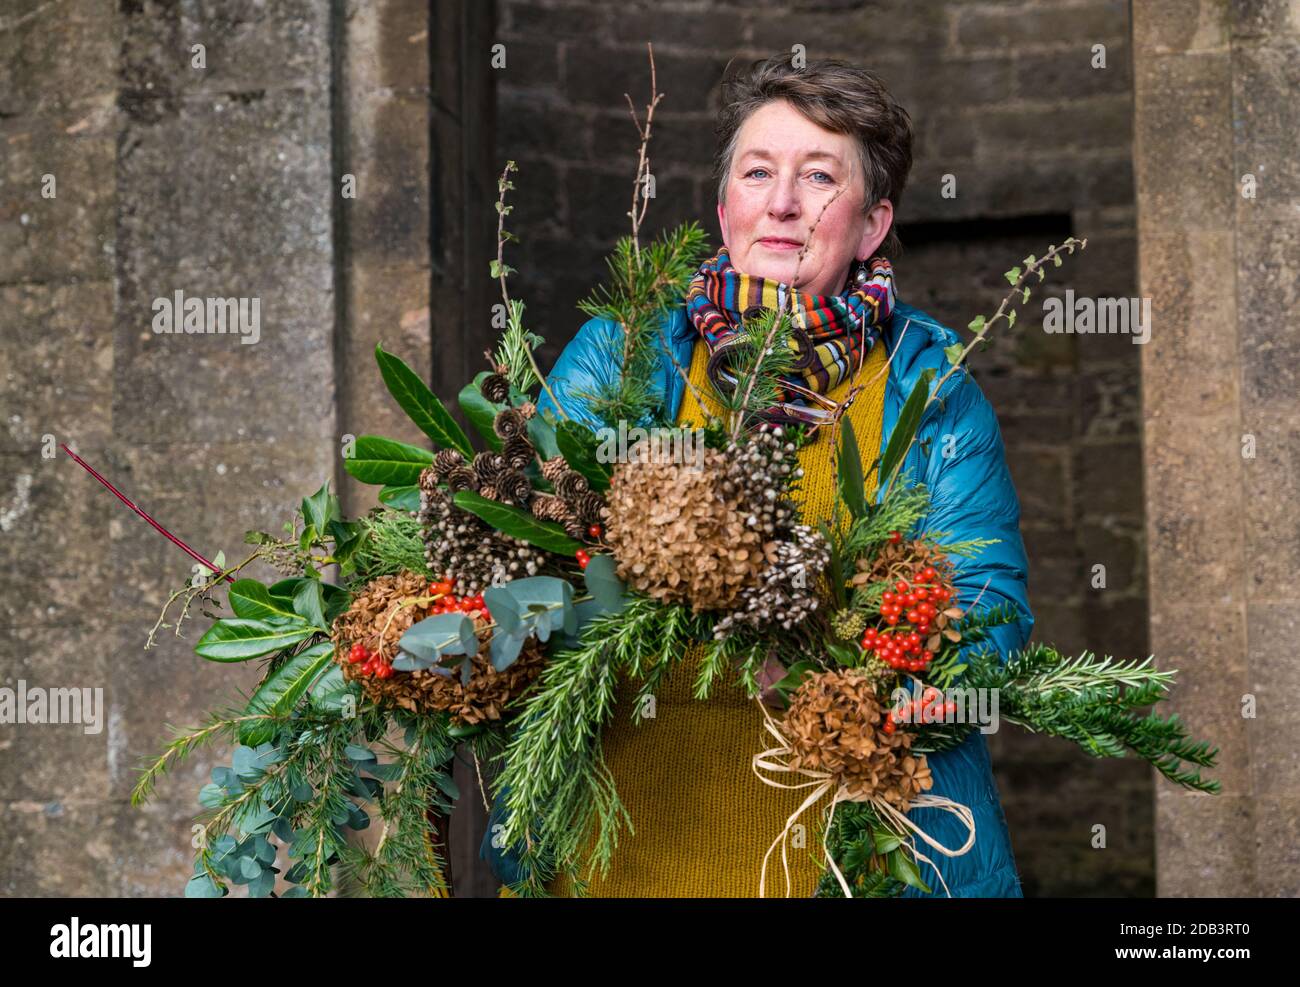 Haddington, East Lothian, Scotland, UK, Flowersmith prepares for Christmas:  Ruth Alder, a flower smith, weaves willow into wreaths to decorate for Christmas using foliage and flowers from Amisfield Walled Garden where she is a volunteer. Amisfield Walled garden is an 18th century garden managed by the Amisfield Preservation Trust and is free to visit all year round. Pictured: Ruth with a finished decorated Christmas wreath Stock Photo